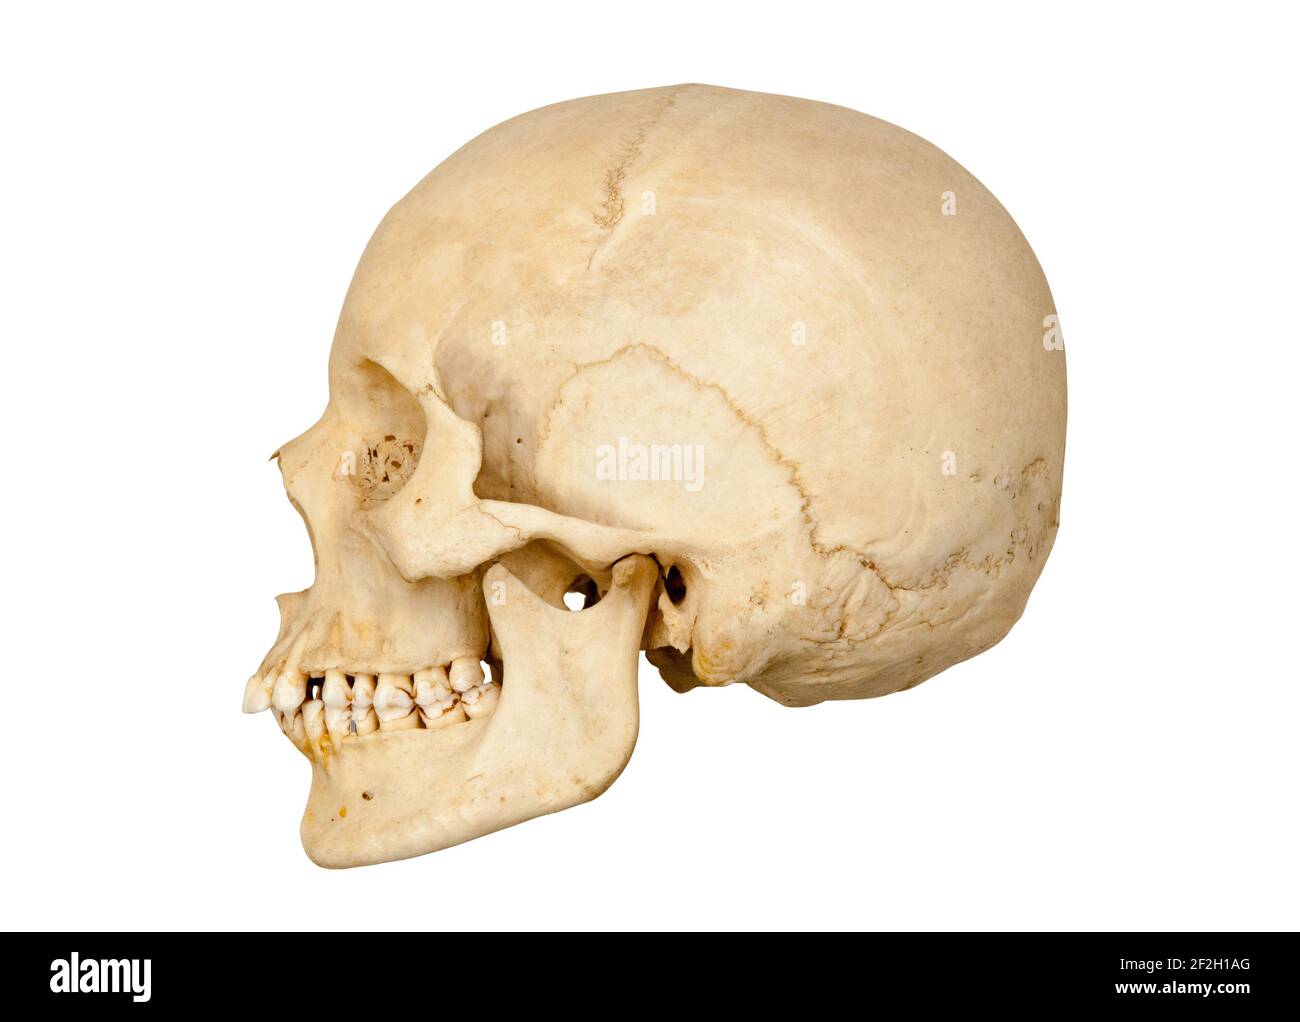 Sideways or profile view of left side of a human skull cut out on a white background. Stock Photo